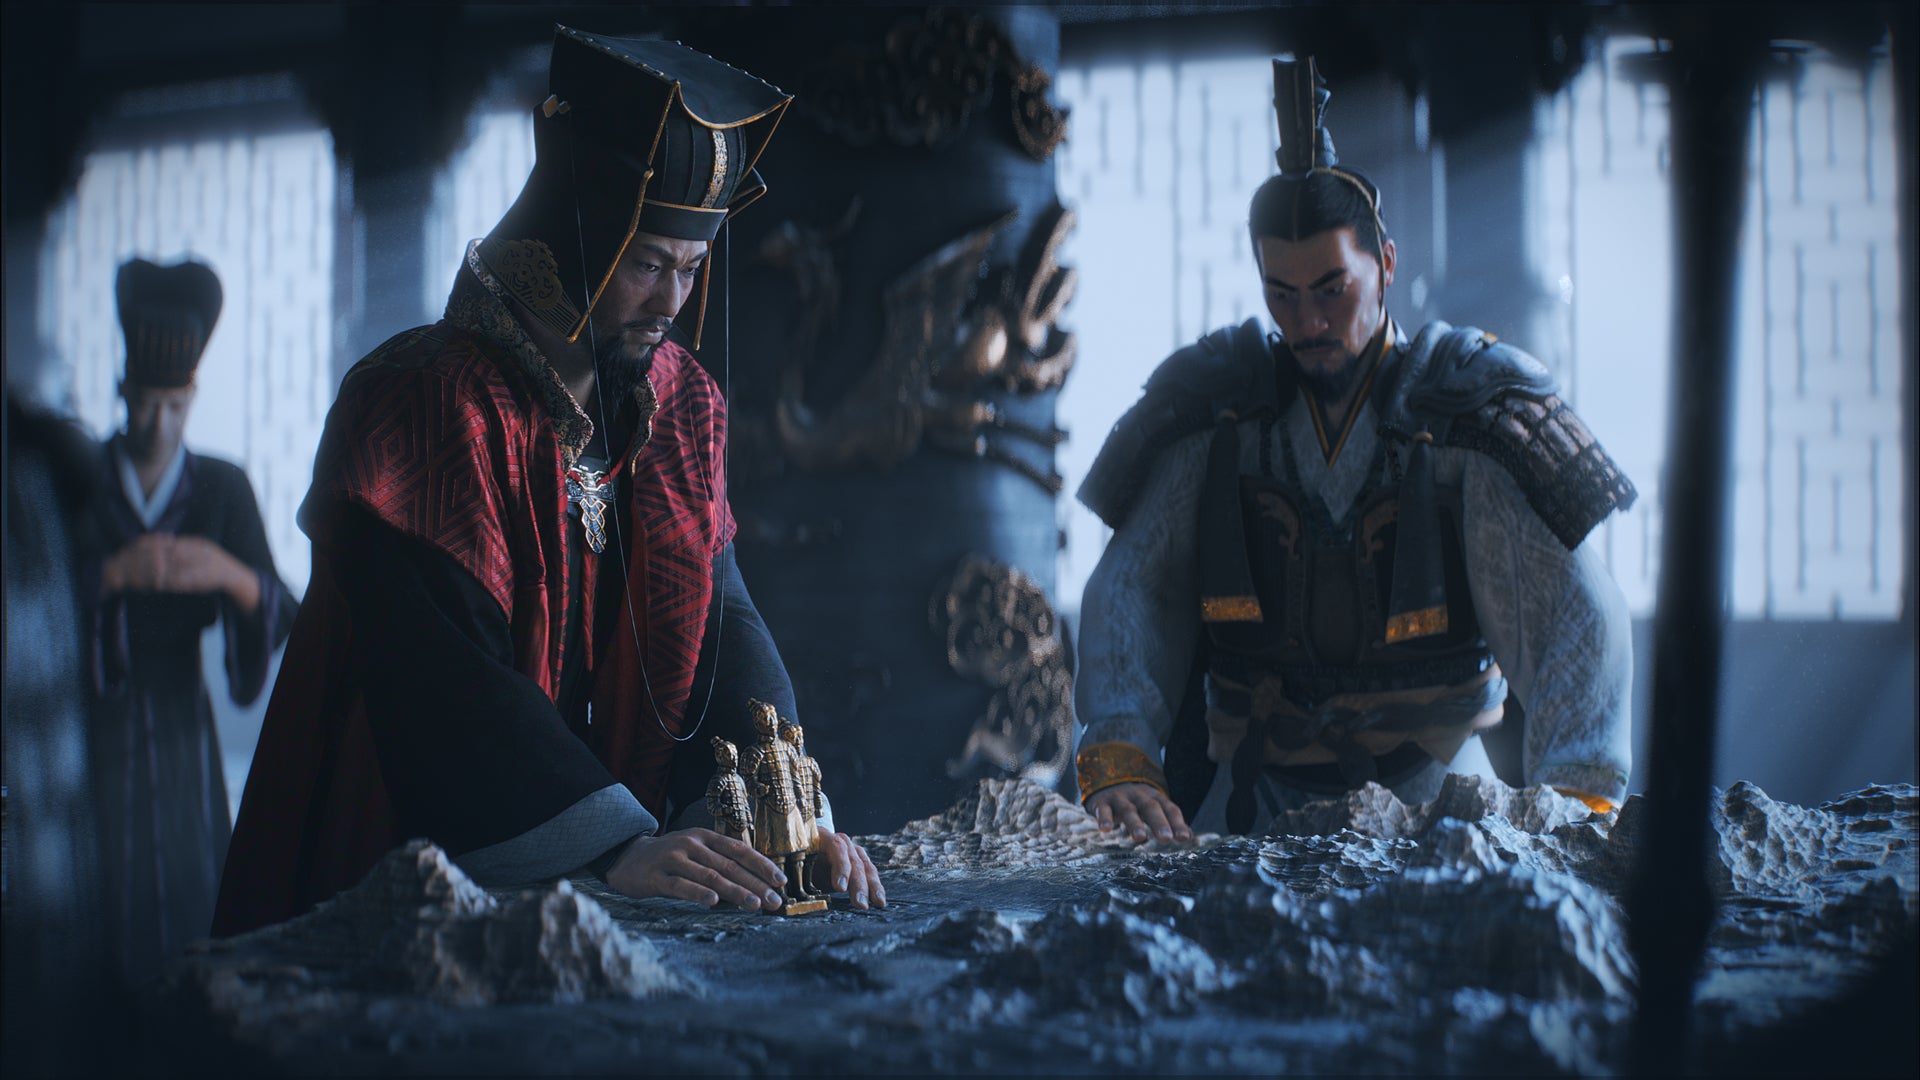 Image for Total War: Three Kingdoms mod support is here, but no nude mods will be allowed